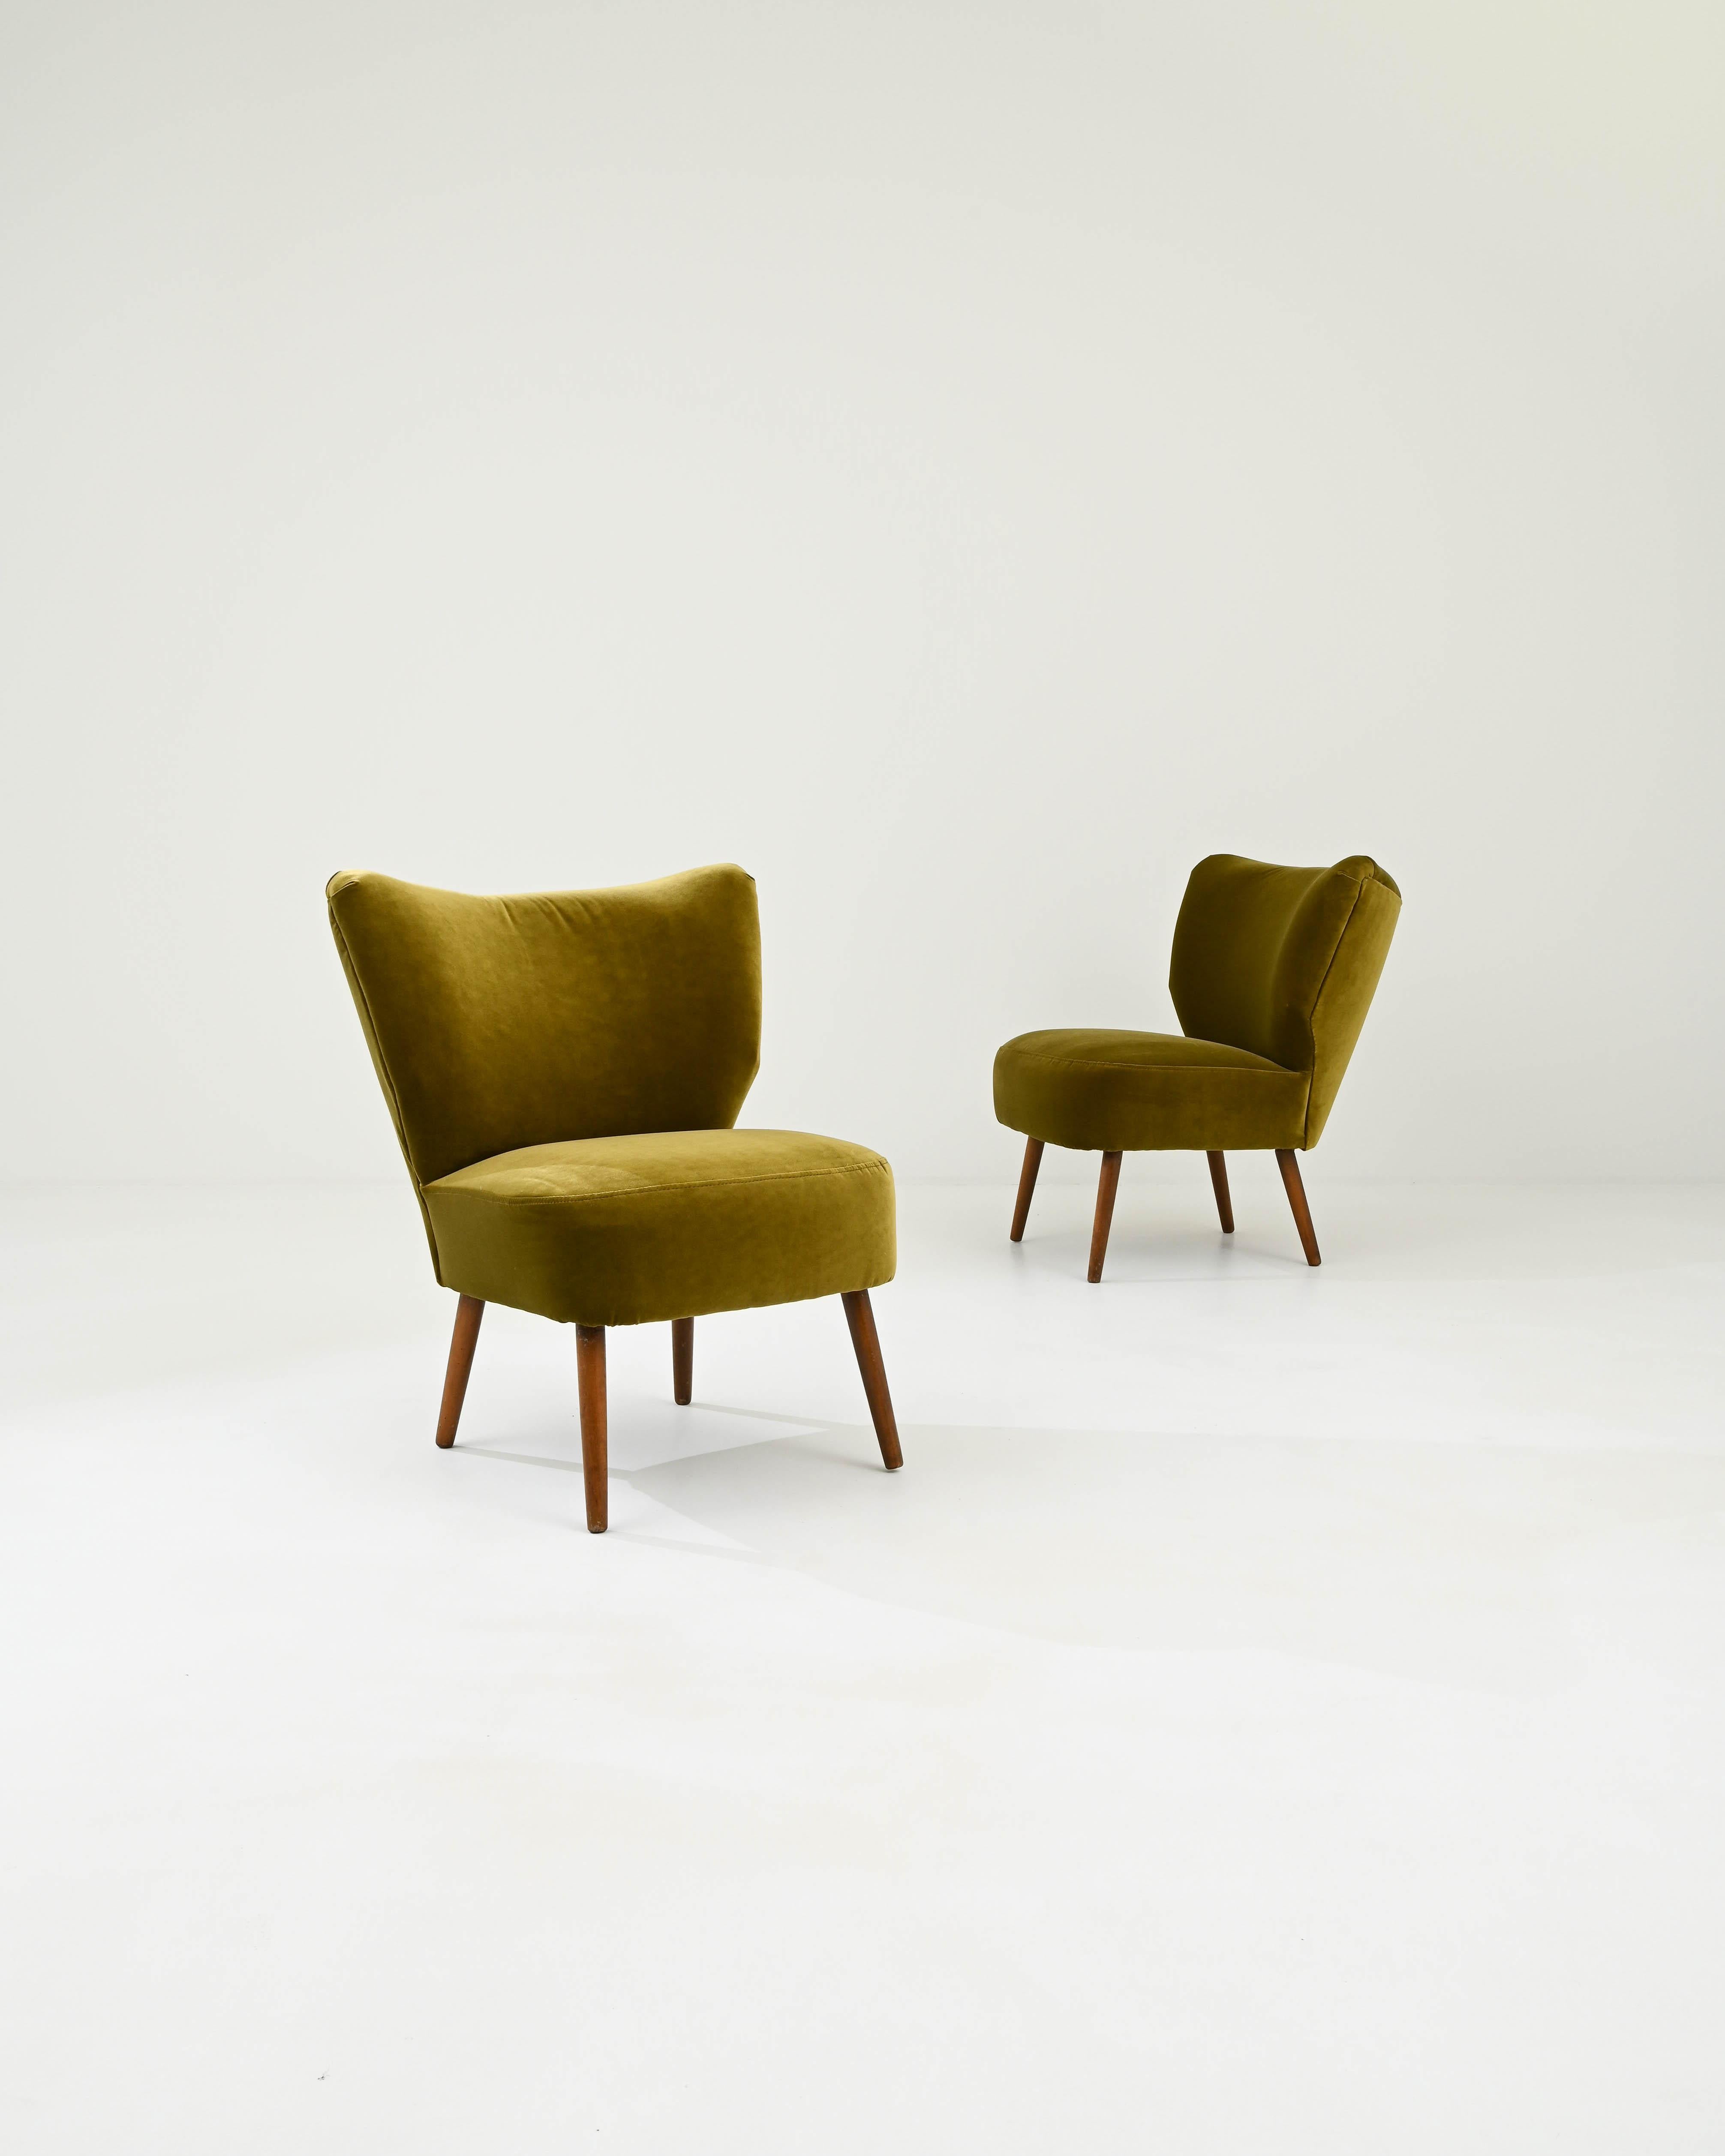 A pair of velvet upholstered lounge chairs made in 1950s Denmark. Characteristic of mid-20th century Danish design, this pair of ornate armchairs impart a sense of chic poise as well as inviting comfort. The hardwood legs have a lovely vintage